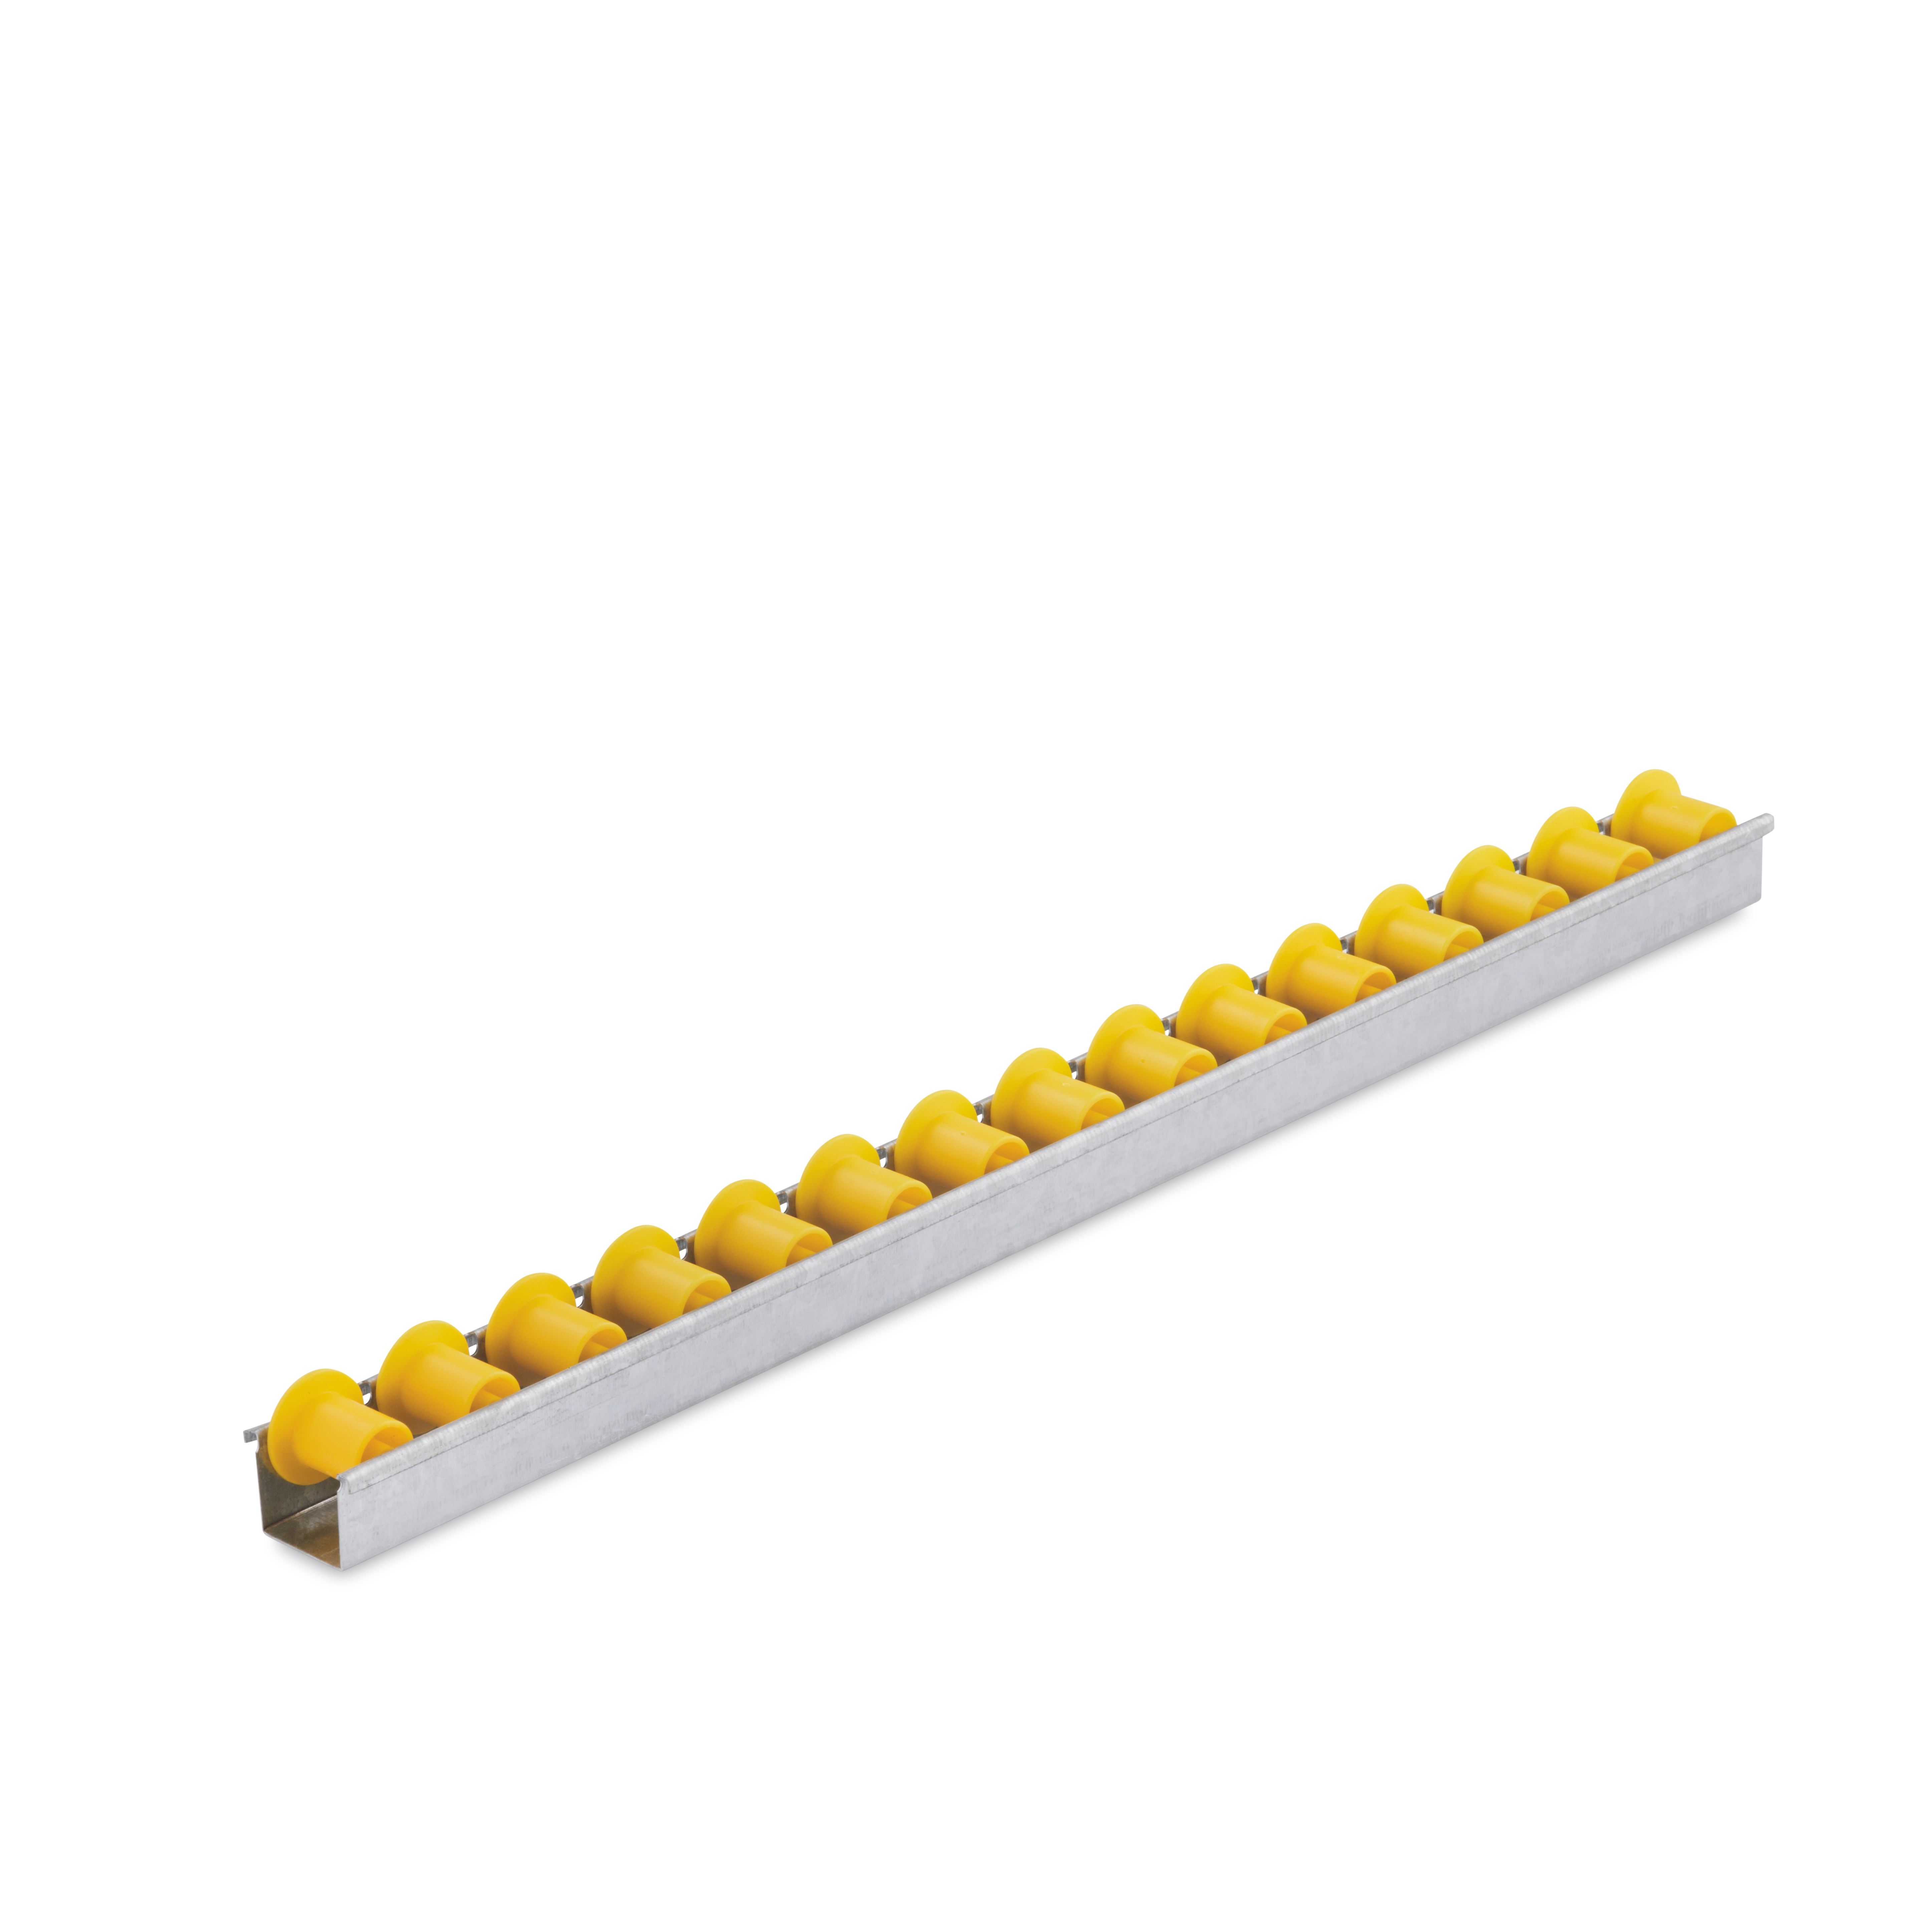 Roller rails mini with wheel flange rollers